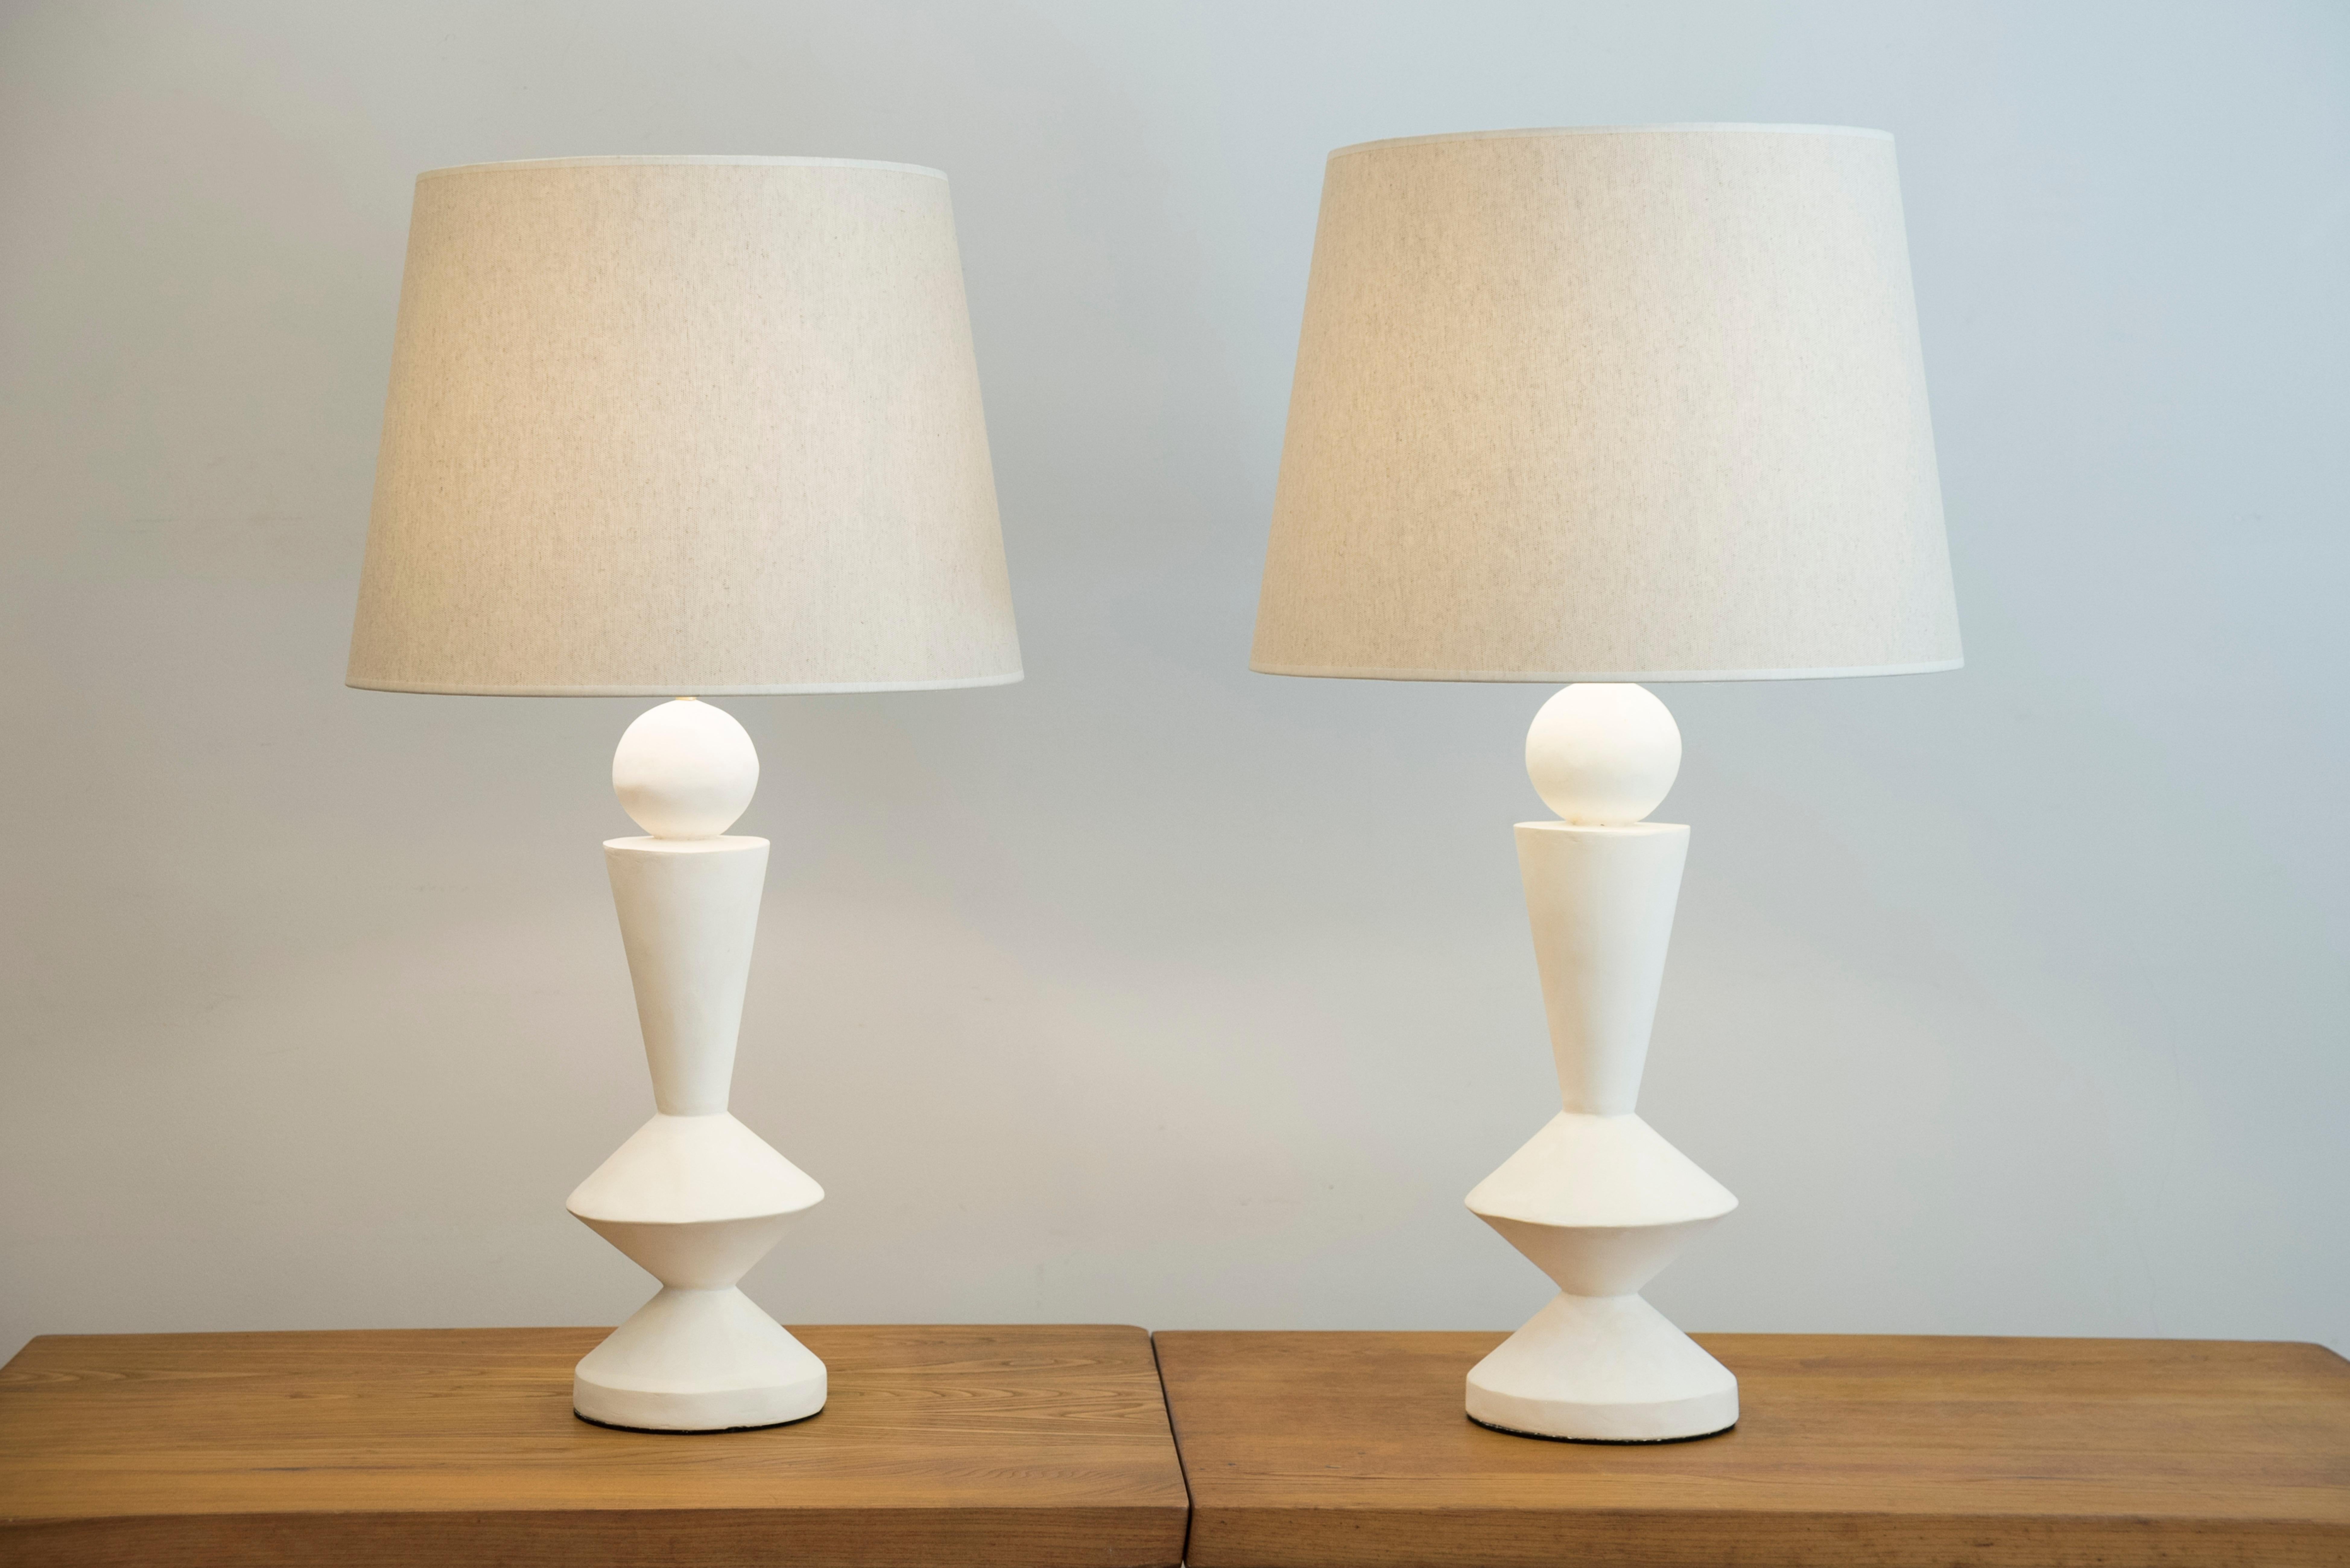 Pair of stuccoed plaster lamps
Custom made shades
Inspired by Jean-Michel Frank
France, modern production

Measures: Height total 84 cm
Height plaster foot 47 cm
Diameter (shade) 45 cm.